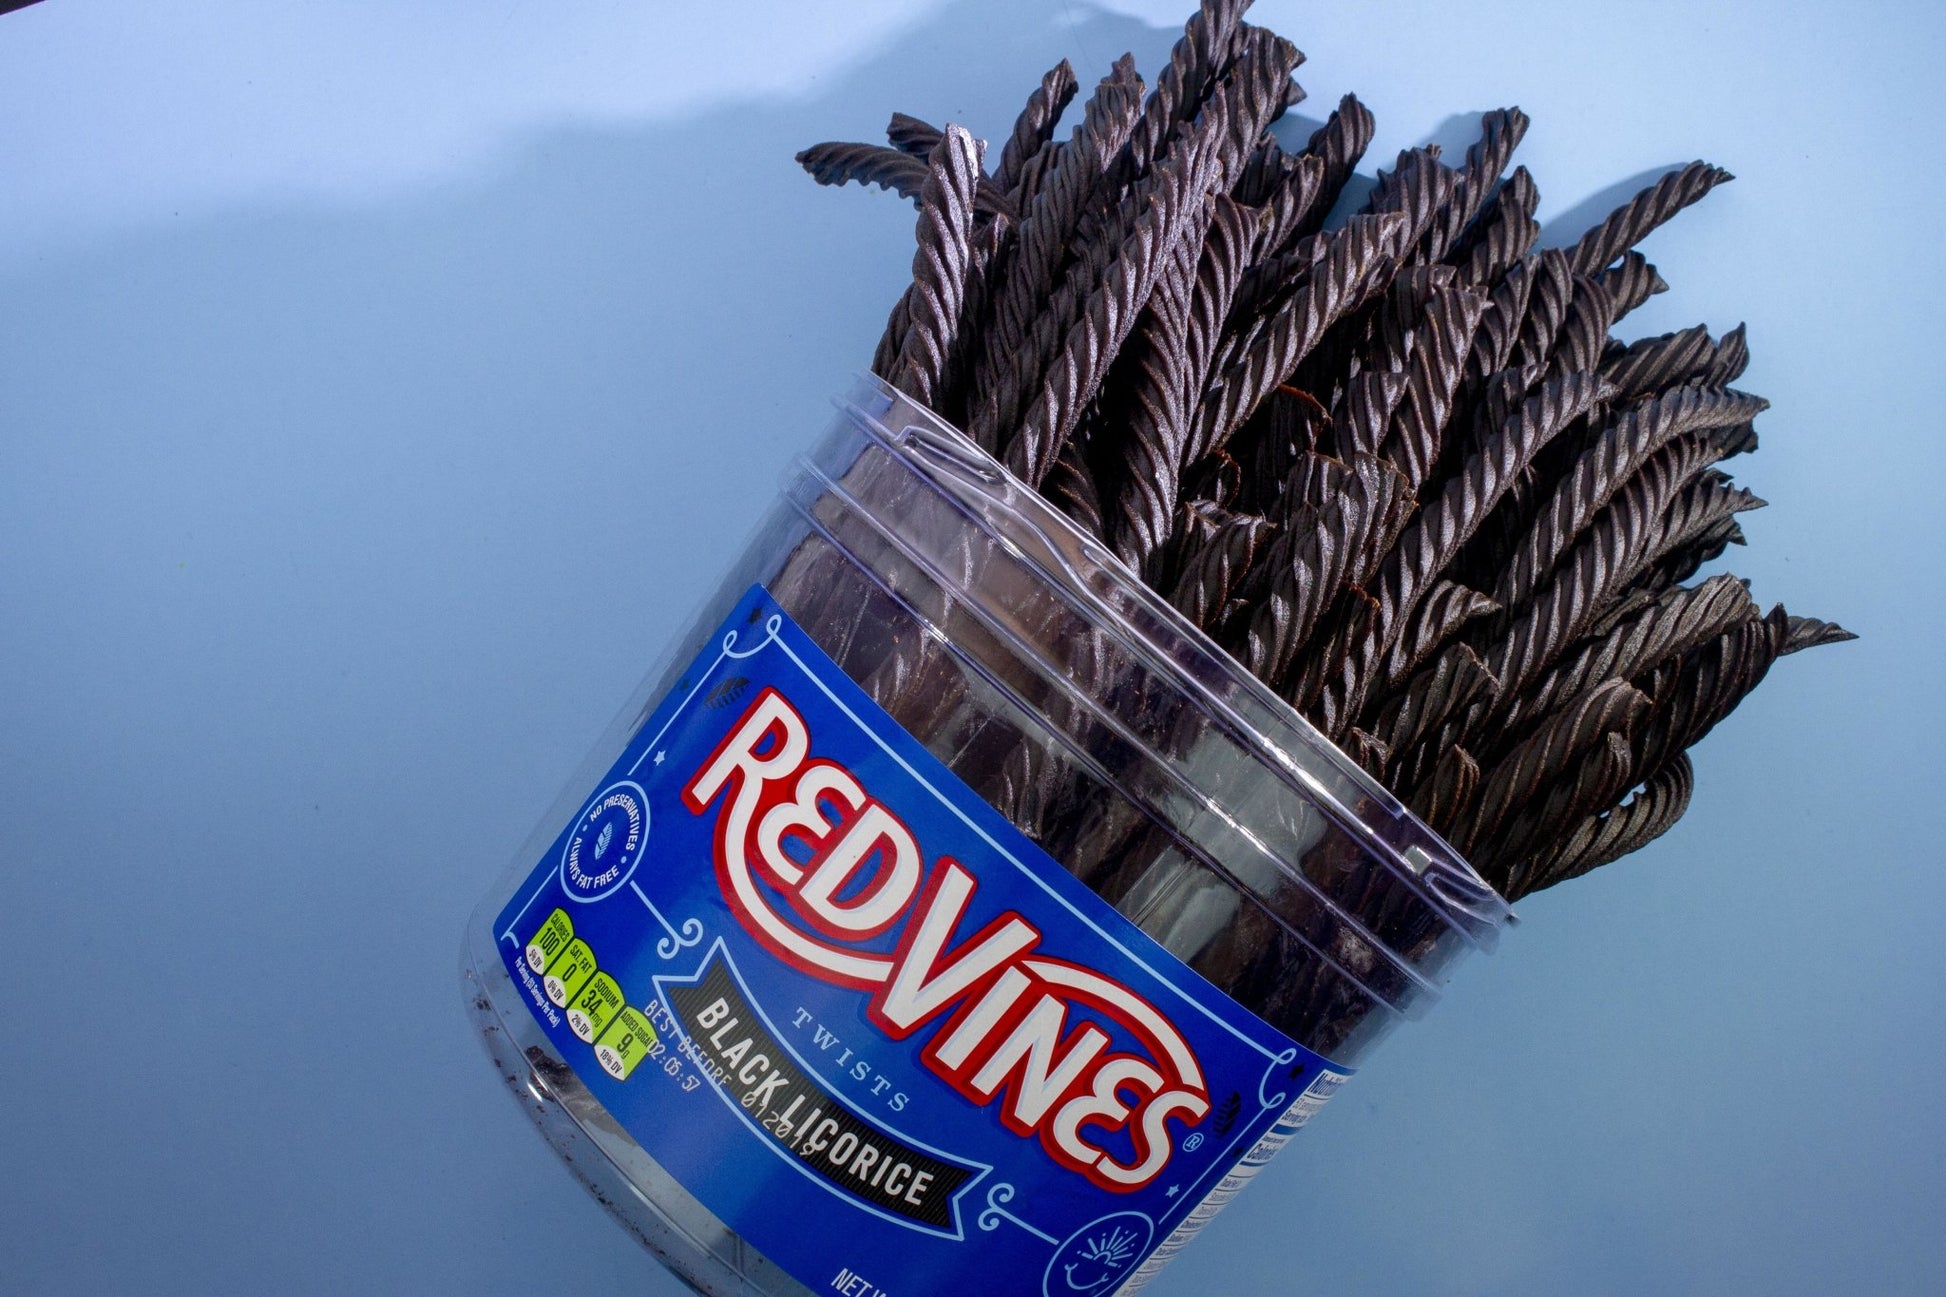 3.5lb Red Vines Black Licorice Jar with Twists falling out